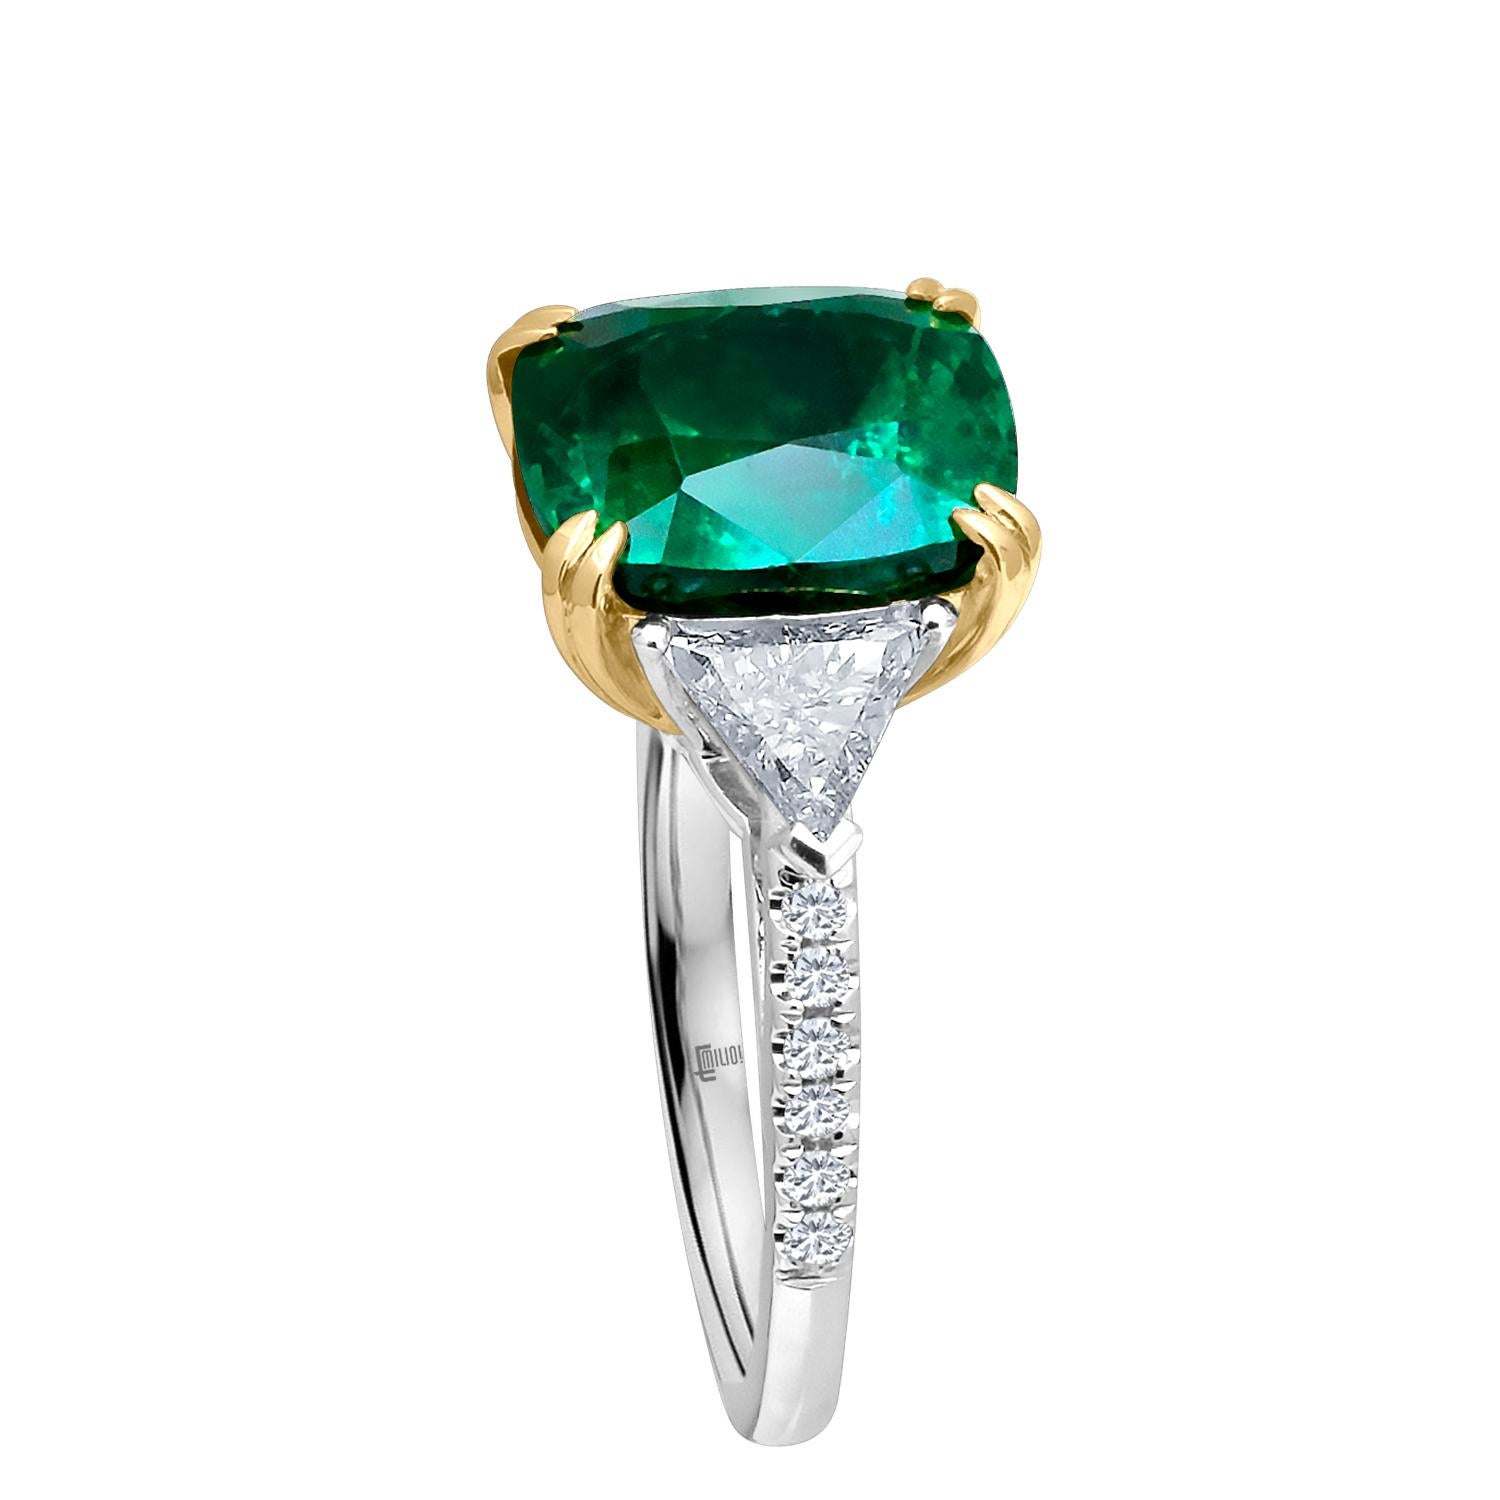 Hand made in the Emilio Jewelry Factory, A gorgeous deep green Certified cushion cut Zambian Genuine Emerald 5.41 Carats set in the center. The emerald is very clean and completely eye clean. Center Emerald Dimensions: 11mm Long 
The Side diamonds